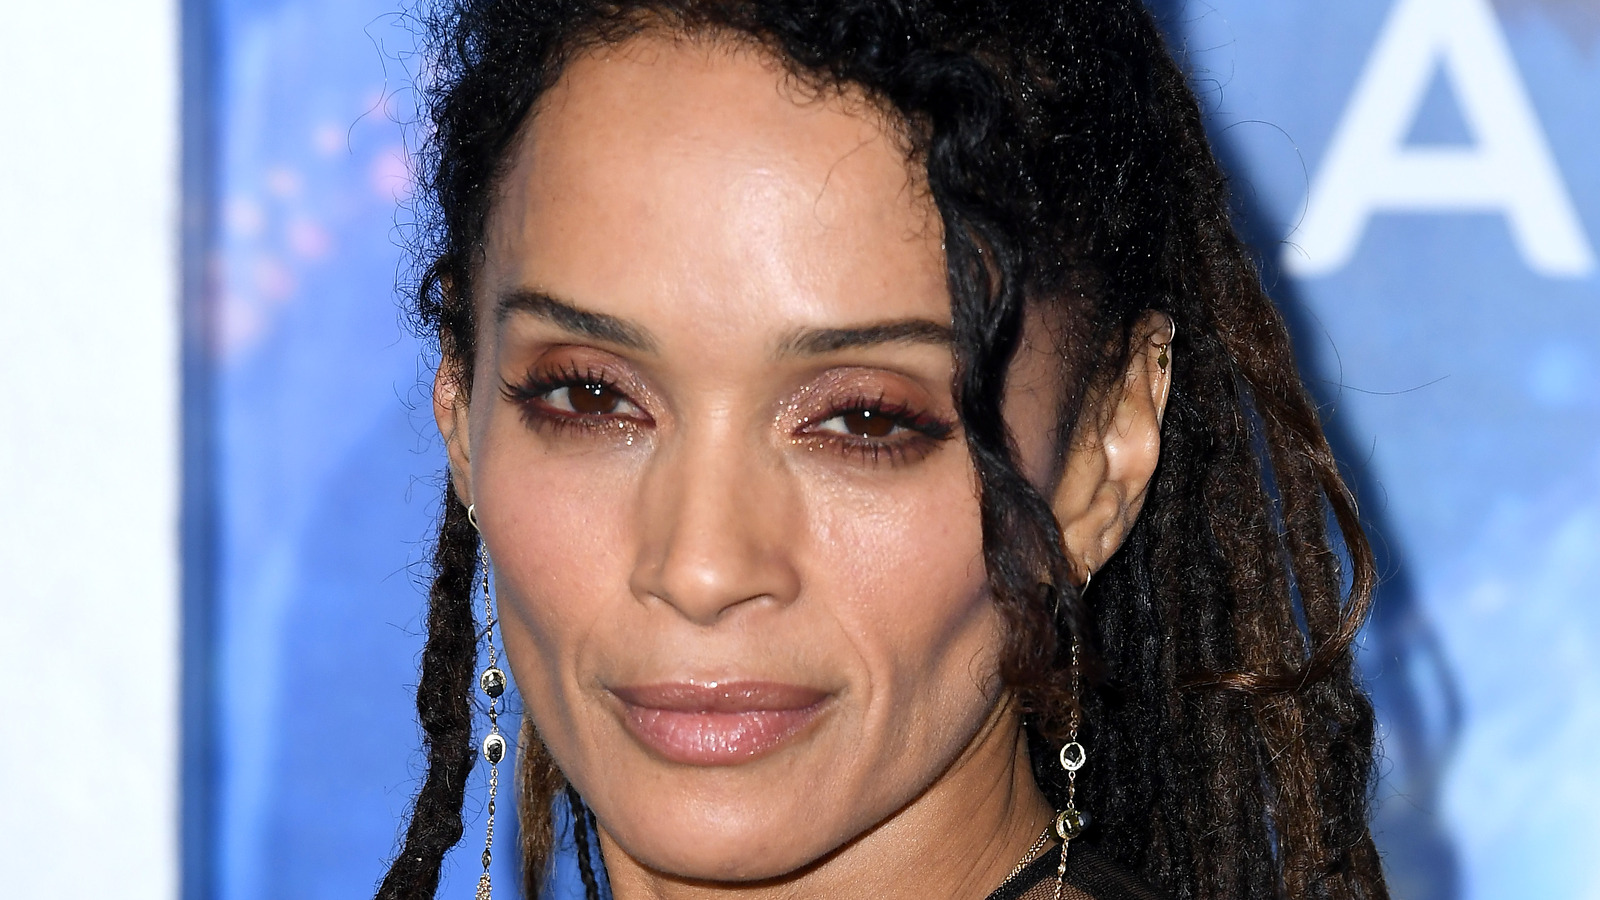 https://www.nickiswift.com/img/gallery/the-transformation-of-lisa-bonet-from-16-to-53/l-intro-1624889441.jpg